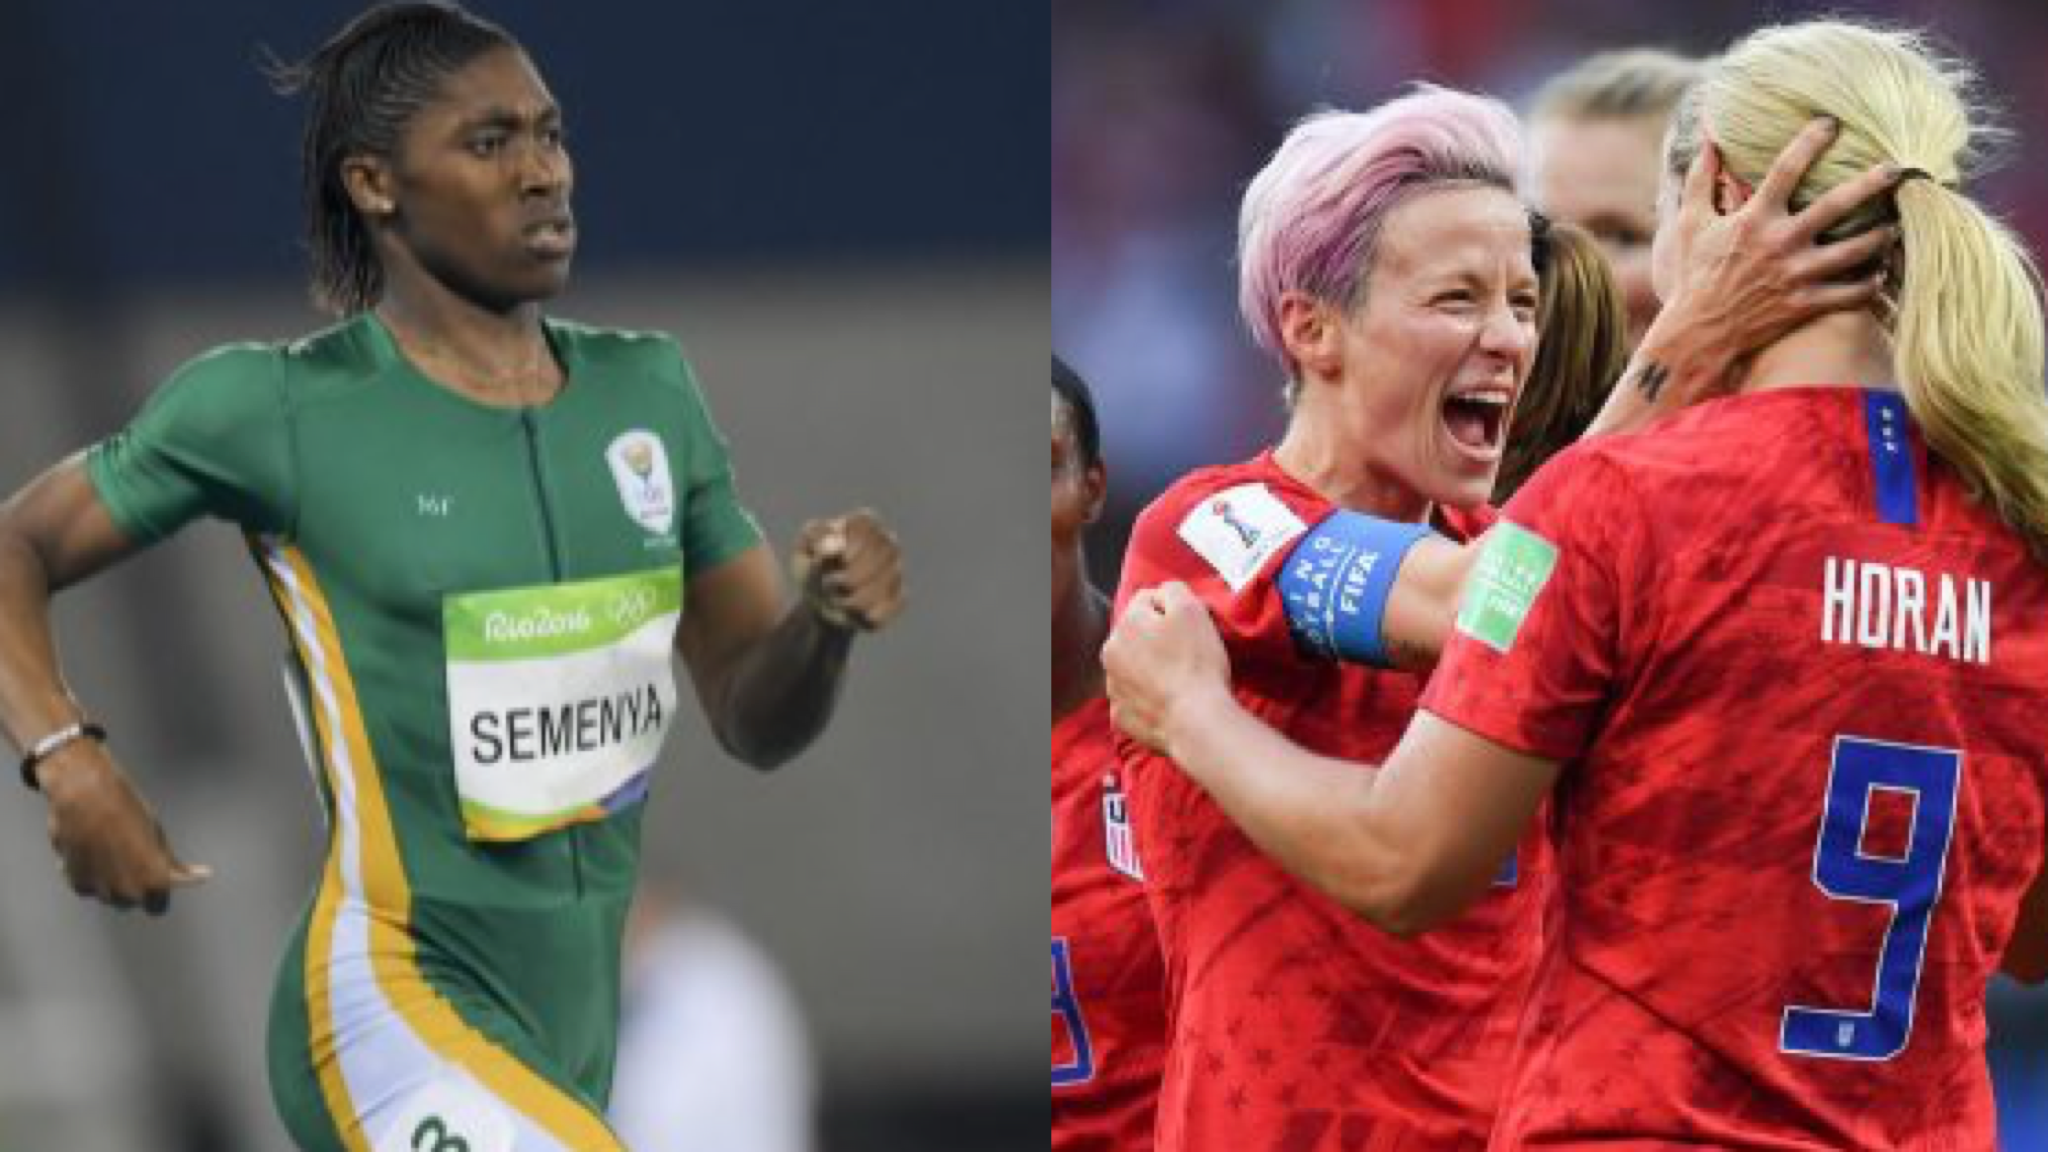 While Megan Rapinoe (right) and hundreds of other LGBTQ athletes are competing at what's being dubbed the "Gaylympics," Caster Semenya (left) and others are not able to.